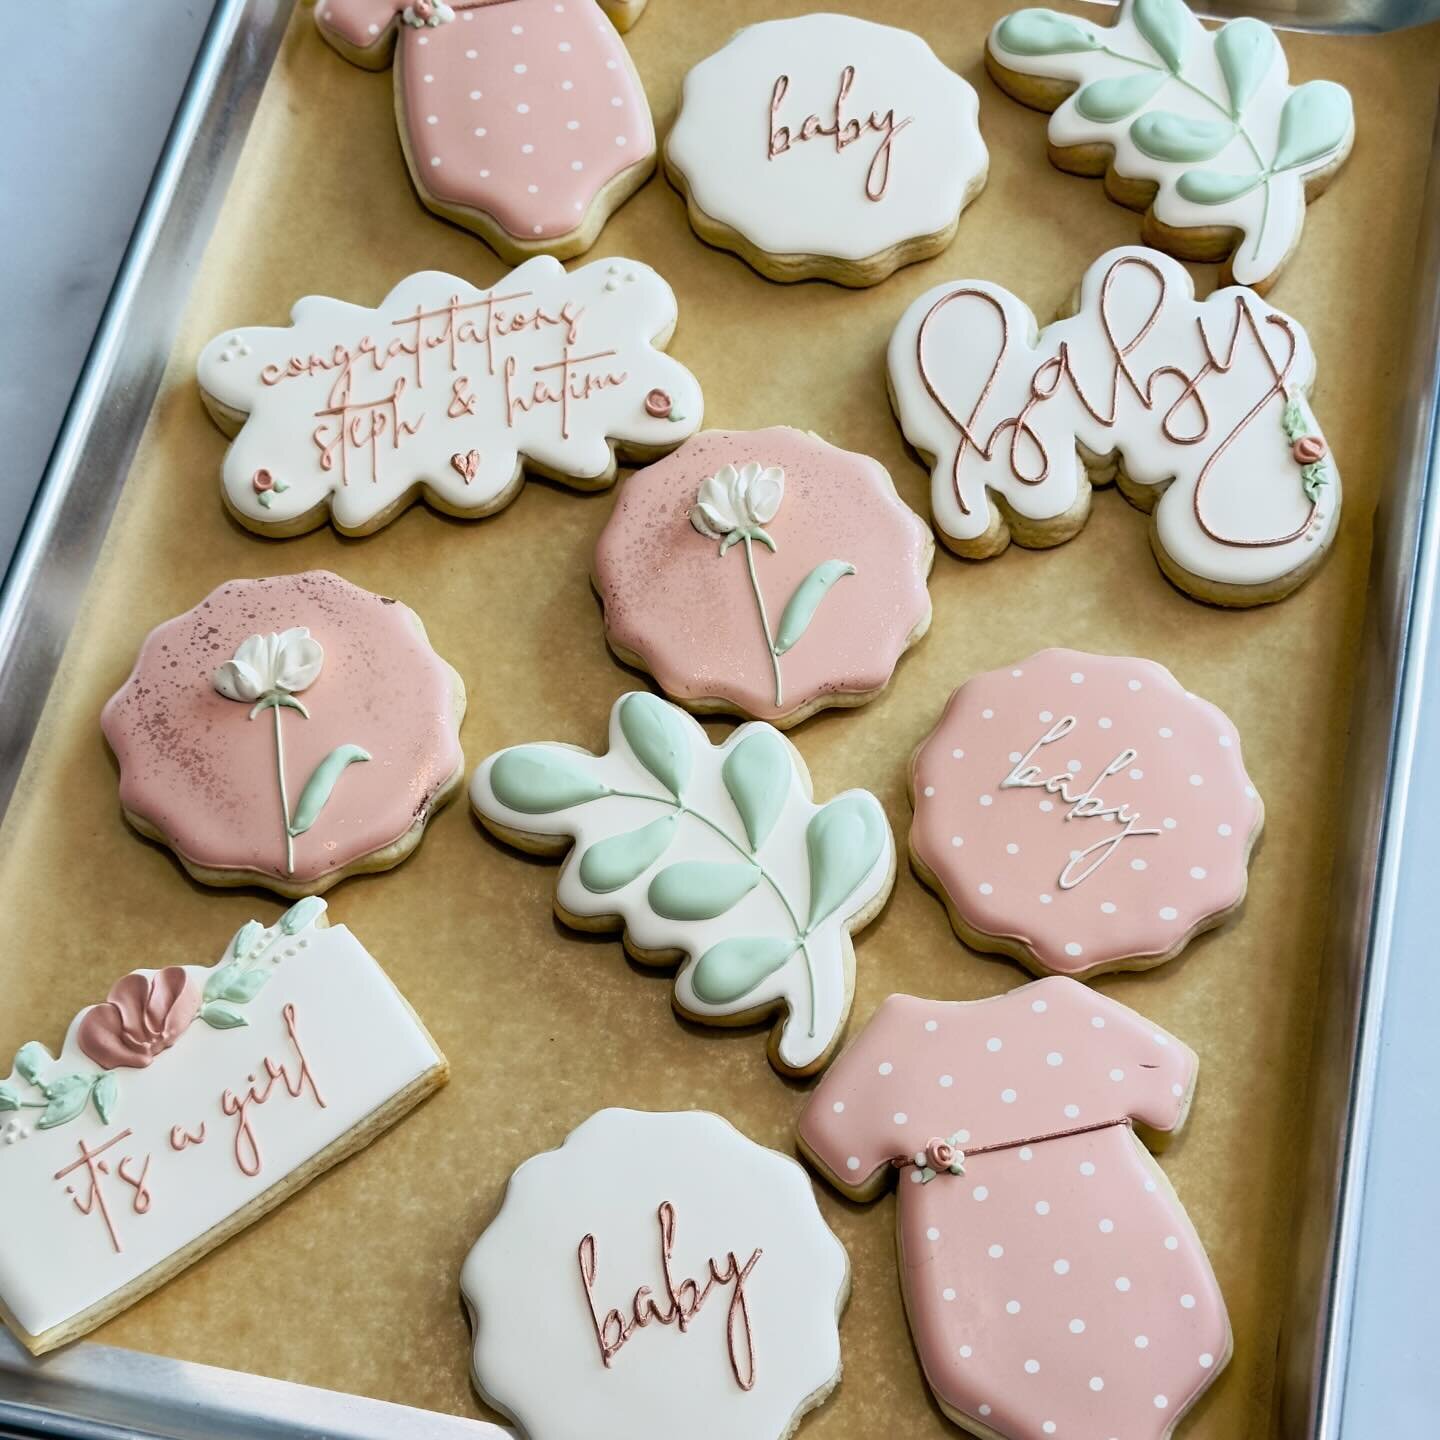 A really pretty rose gold, cream, green set for a new baby! 

#SugarCookies #Homemade #RoyalIcing #CustomCookies #HandDecoratedCookies #DecoratedCookies #DecoratedSugarCookies #CookieArt #EdibleArt #CookiesOfInstagram #CookiesOfIG #WillowGlen #SanJos